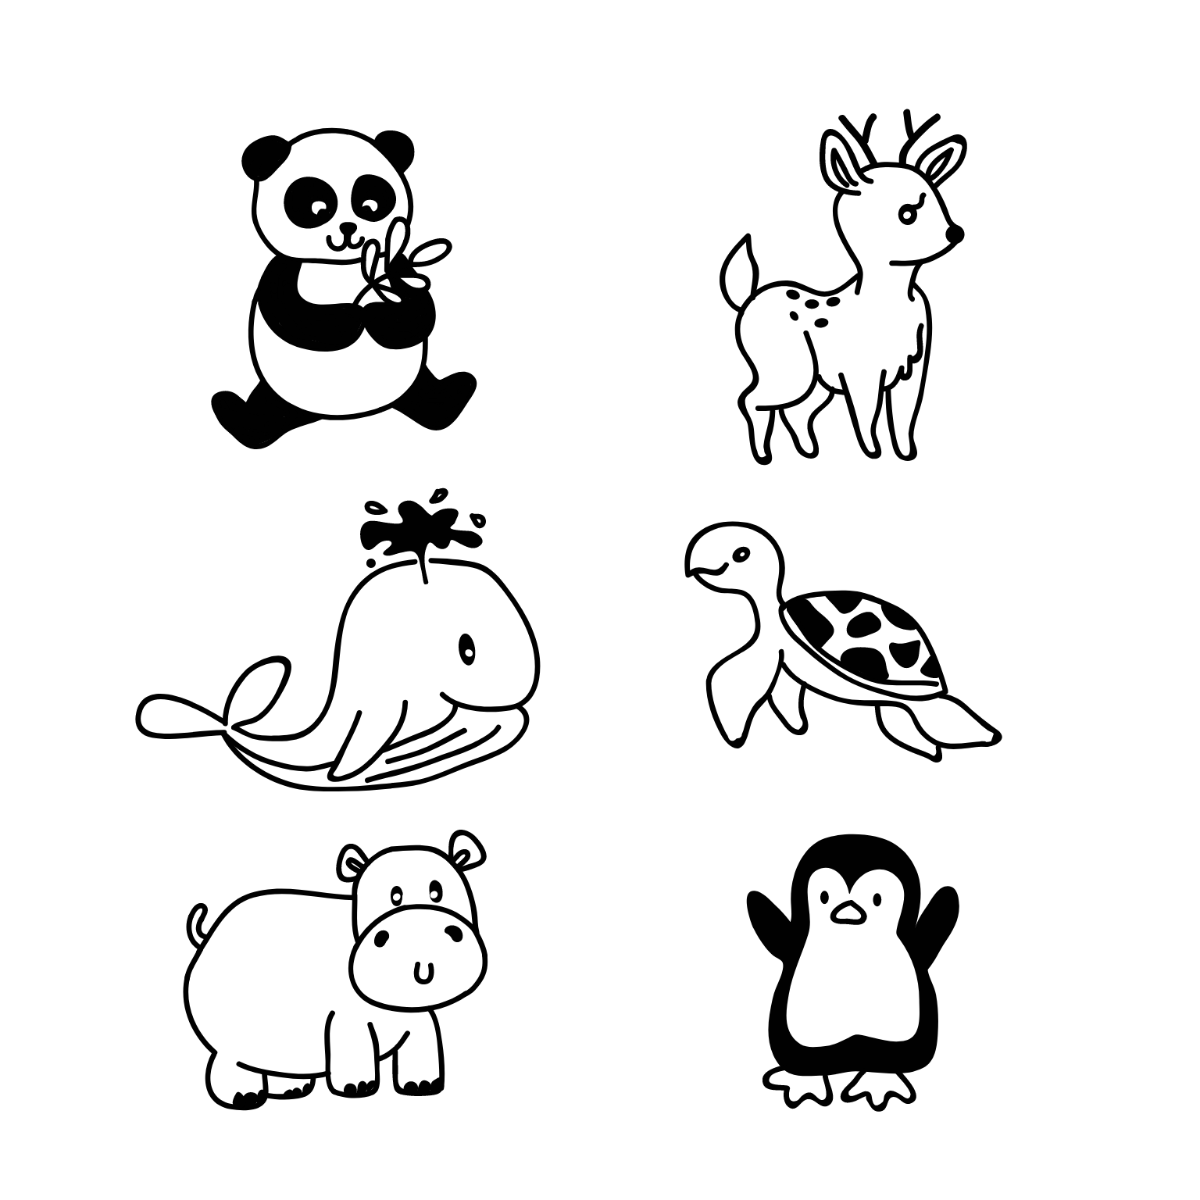 Free Animal Doodle Vector Template